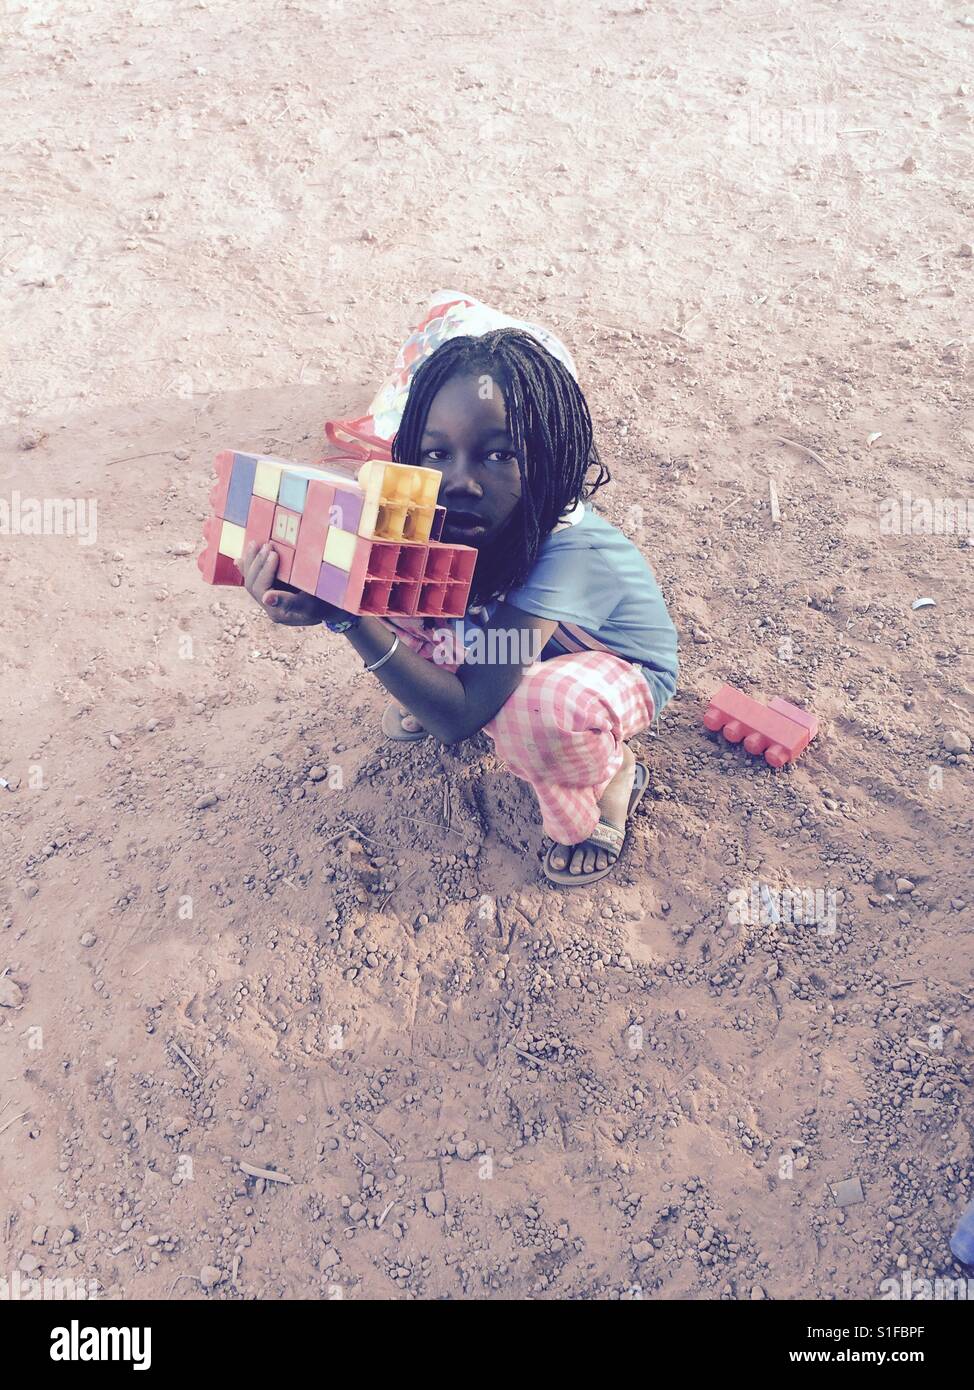 A child plays with legos in Burkina Faso, Africa. Stock Photo